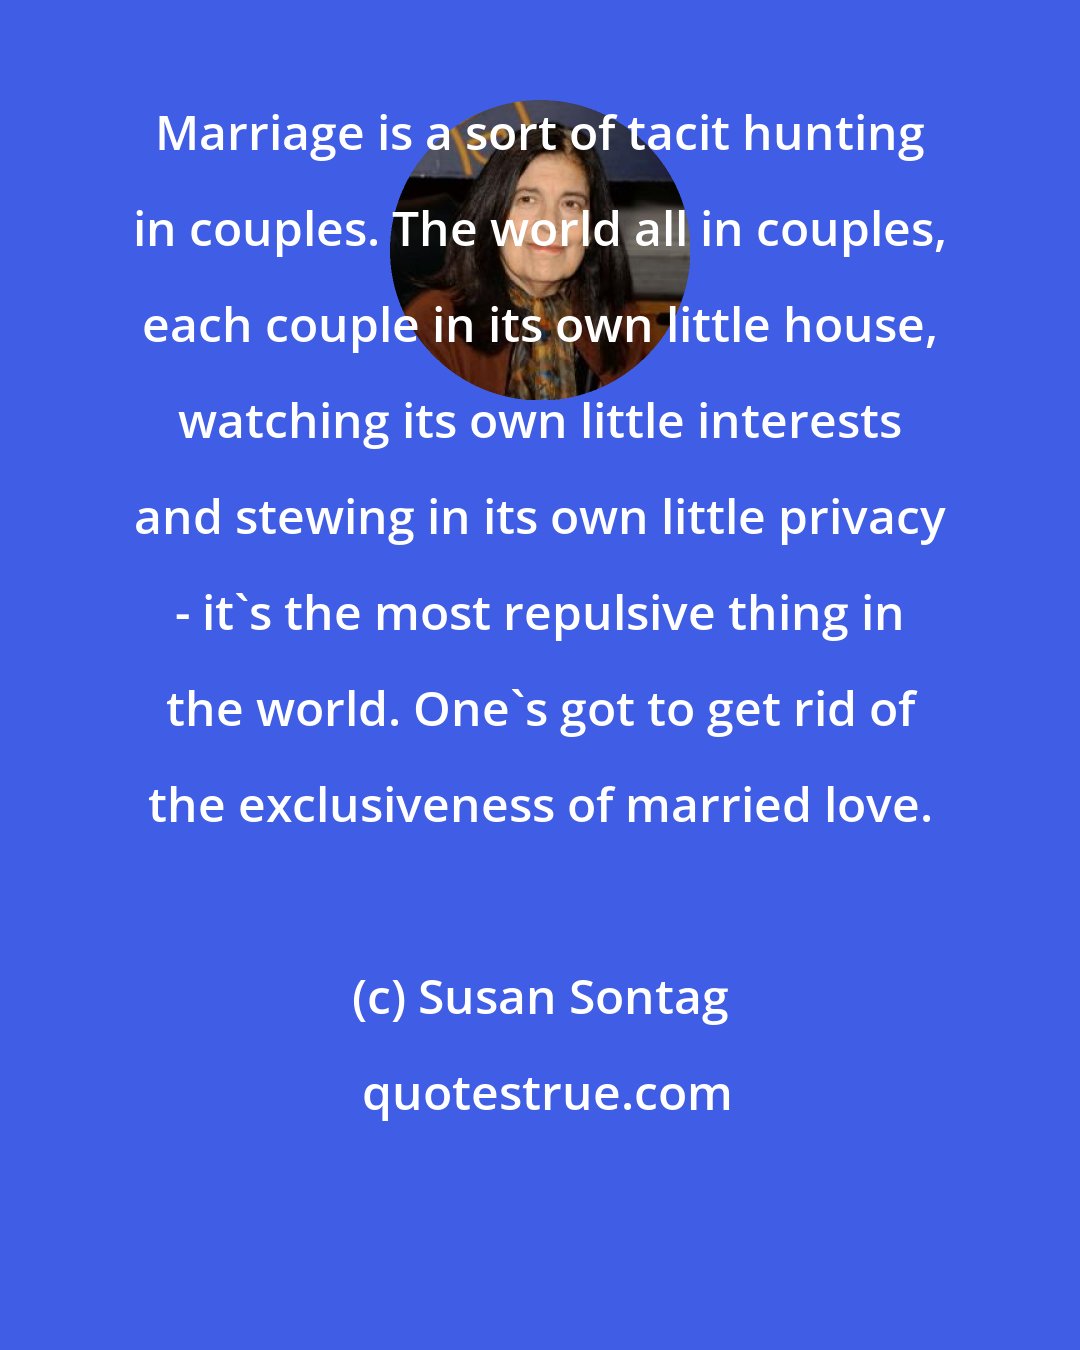 Susan Sontag: Marriage is a sort of tacit hunting in couples. The world all in couples, each couple in its own little house, watching its own little interests and stewing in its own little privacy - it's the most repulsive thing in the world. One's got to get rid of the exclusiveness of married love.